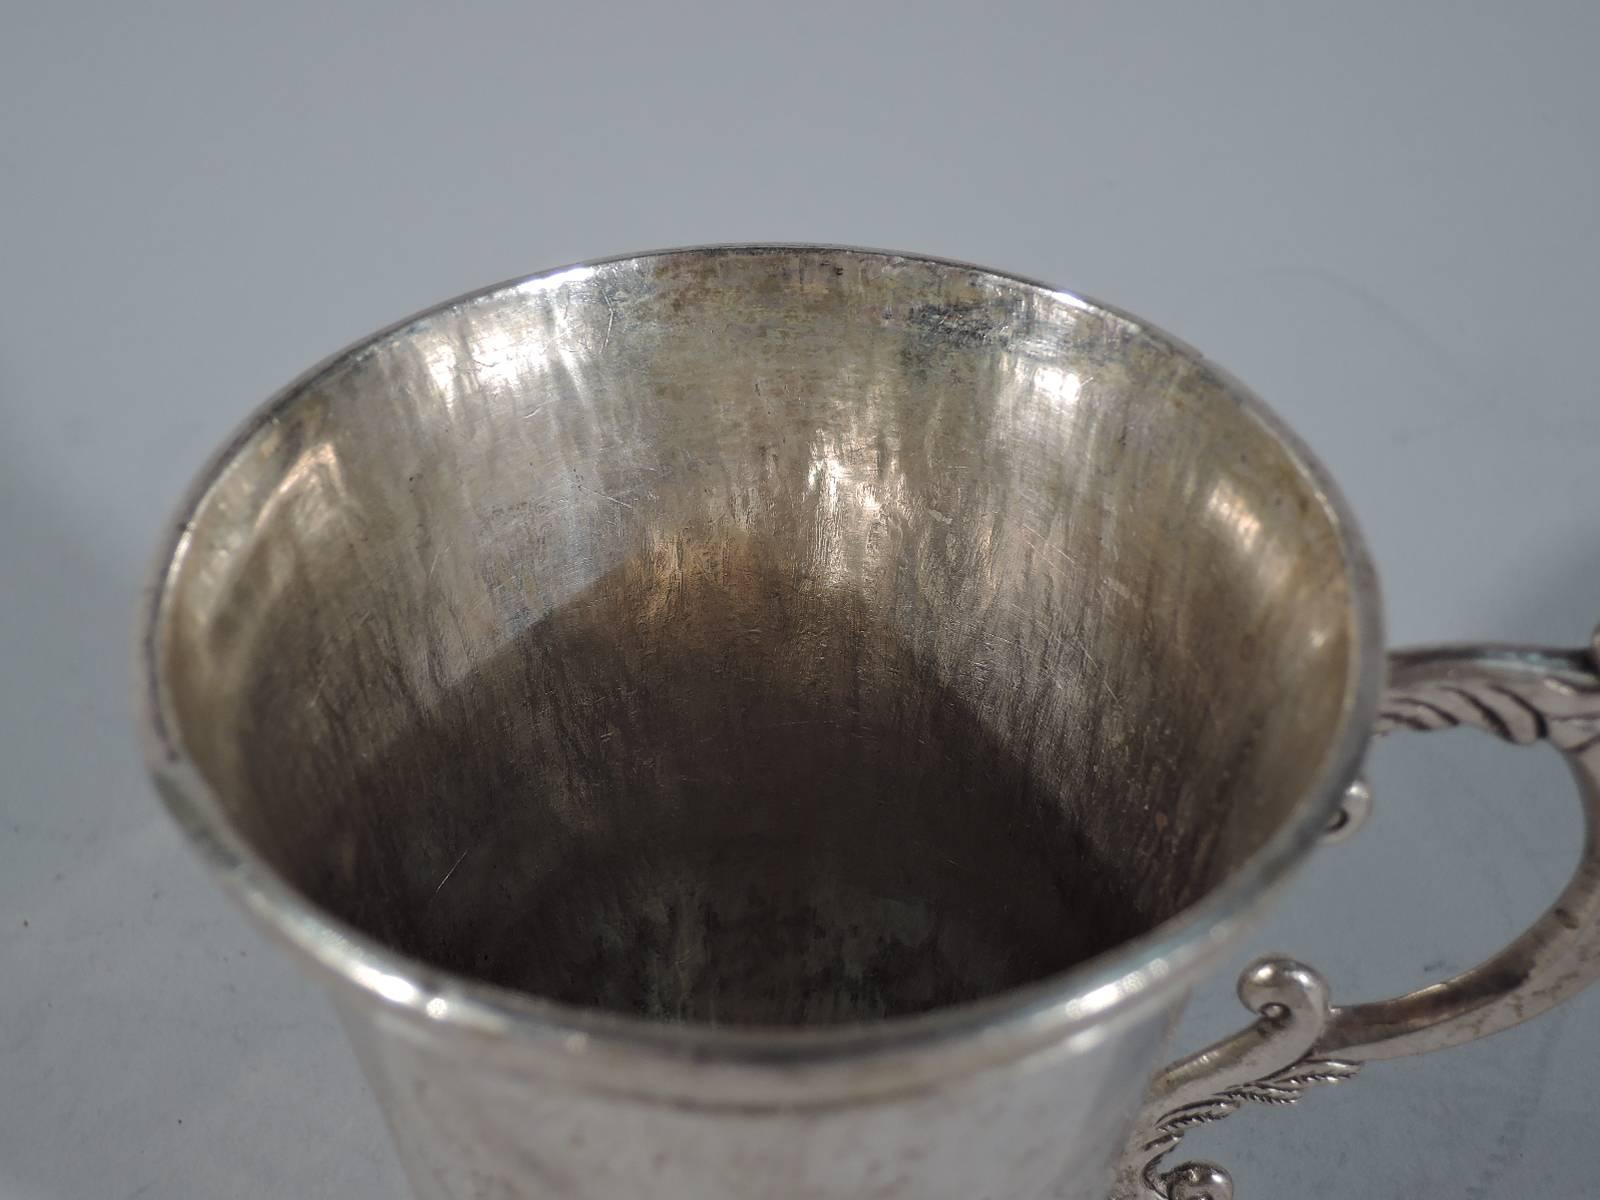 South American silver mug, circa 1850. Tapering sides and applied rim and foot. Engraved band with figures and flowers. A highlight is the man dangling upside down in a beast’s jaws and his spear-wielding rescuer. Worked s-scroll handle with leaf